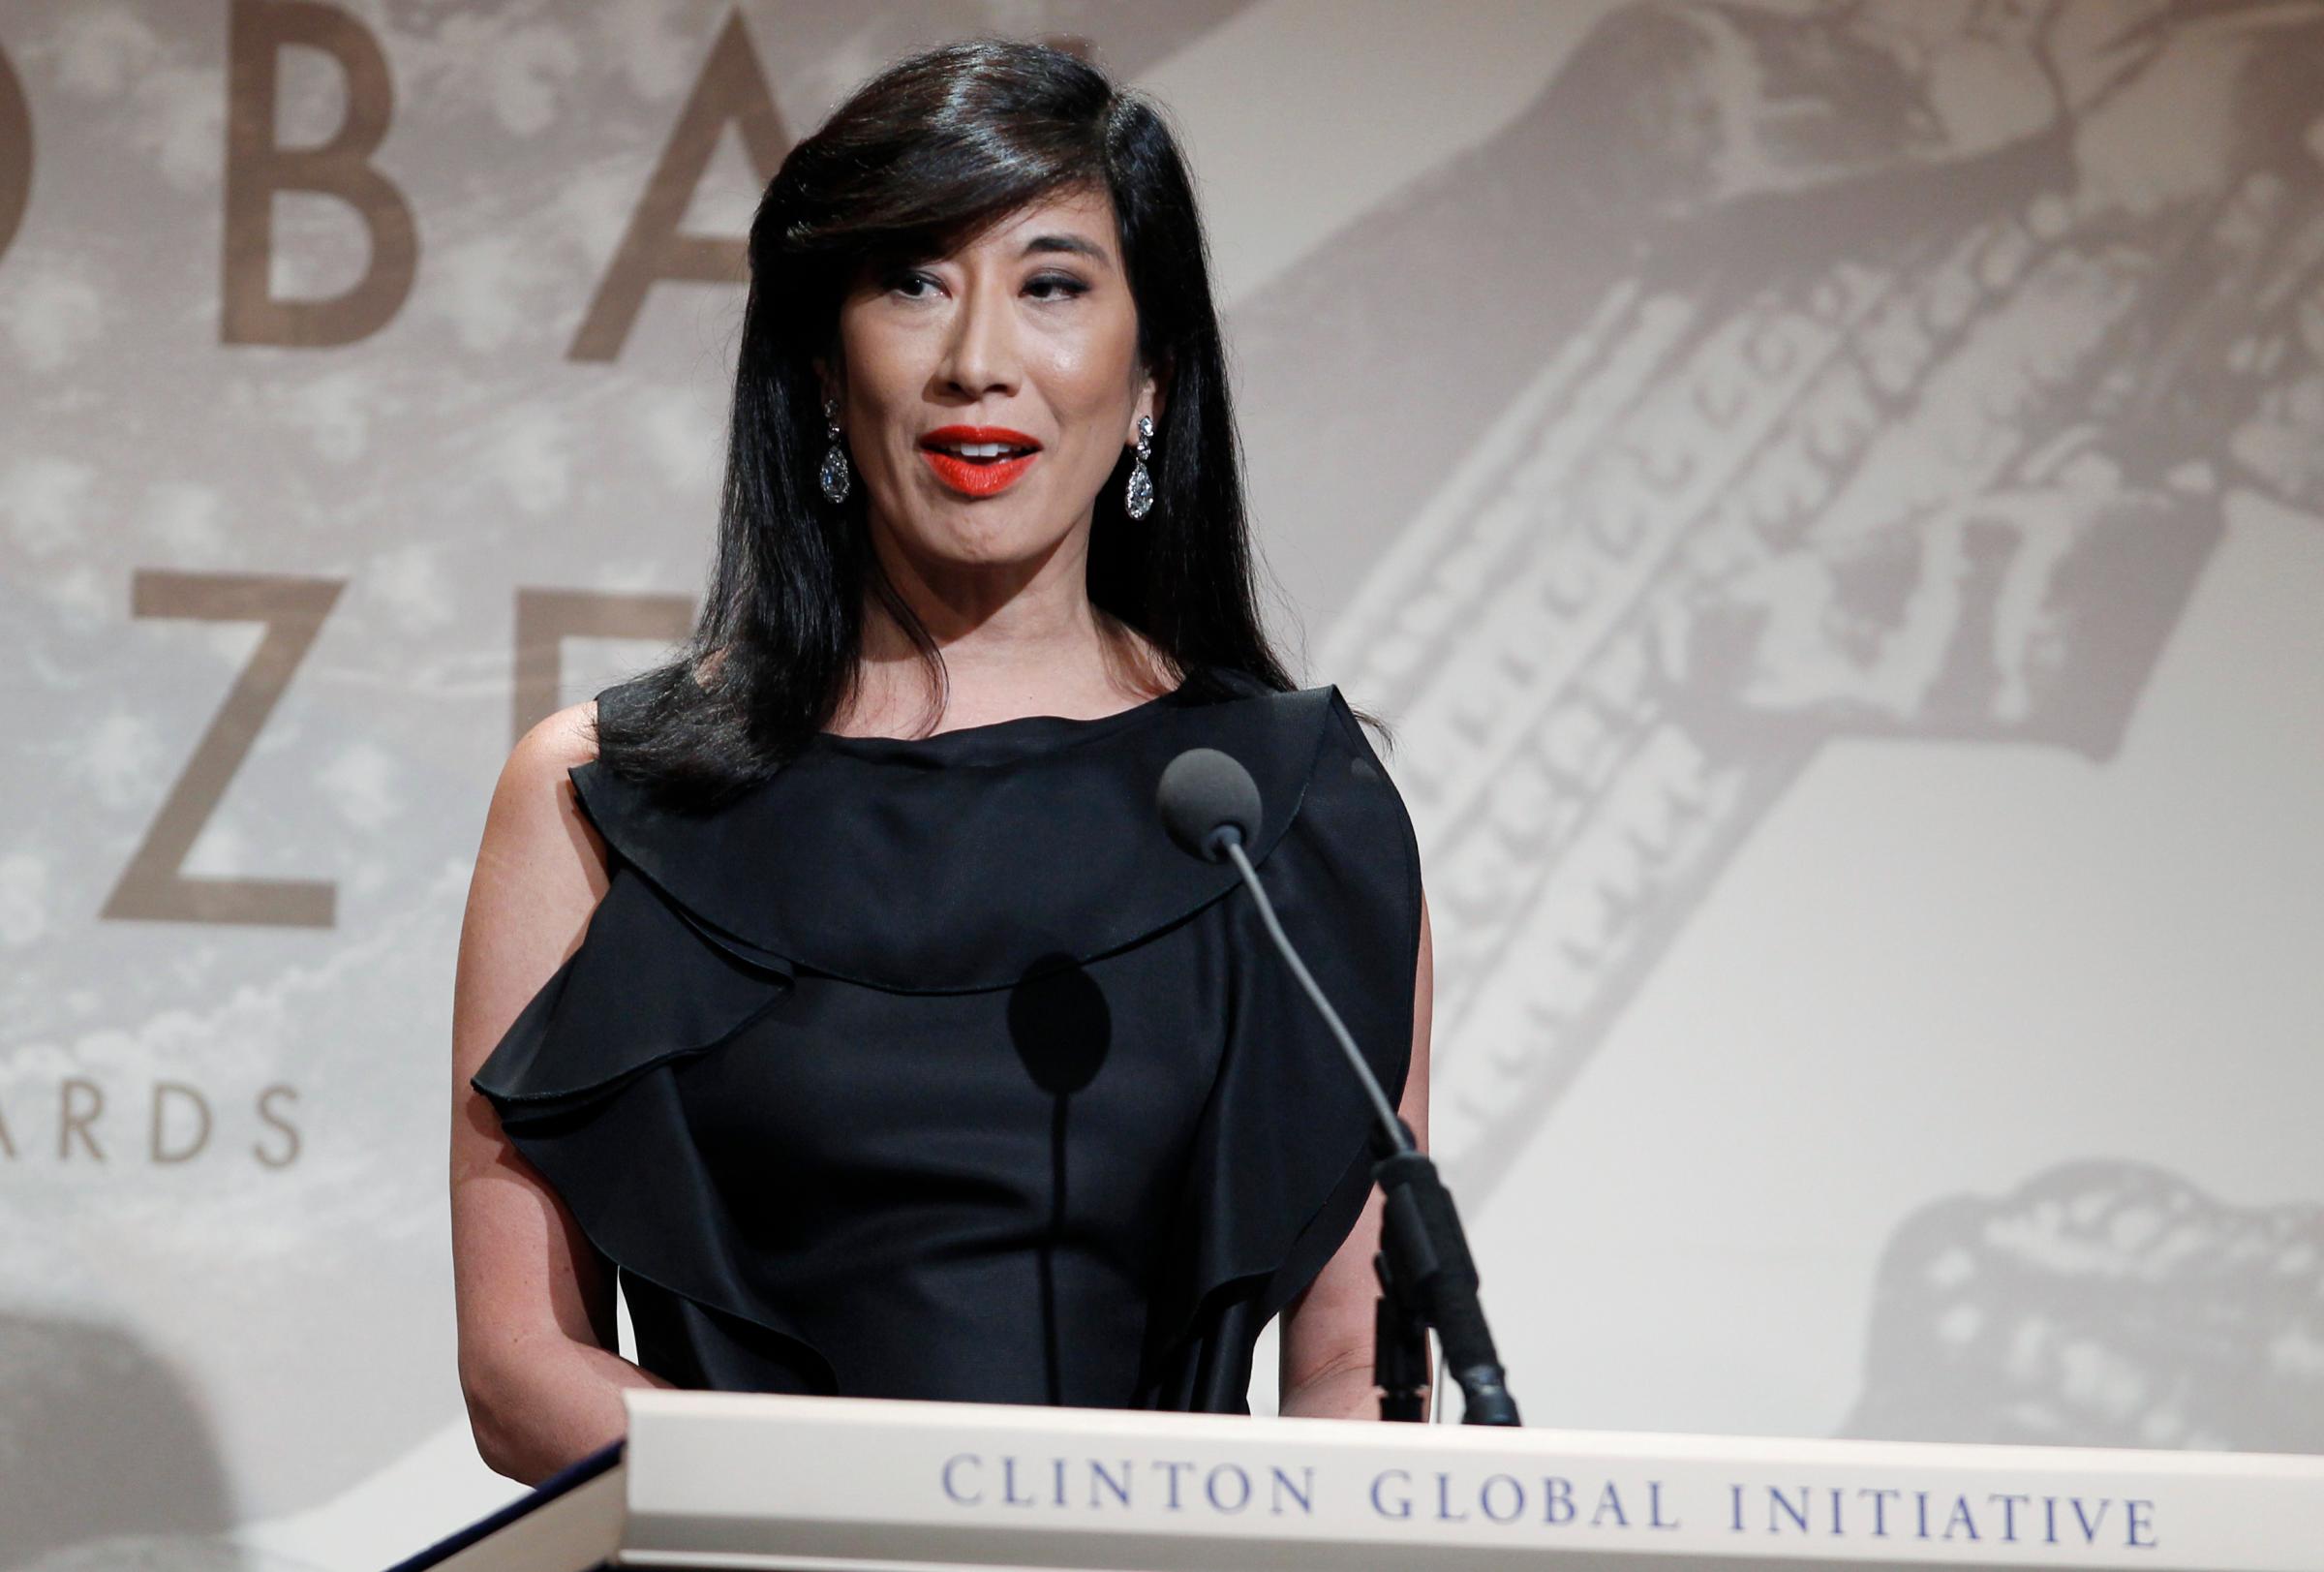 Andrea Jung, CEO of Avon Products Inc., accepts the Leadership in the Corporate Sector award during the Clinton Global Citizen Award ceremony marking the culmination of the Clinton Global Initiative in New York